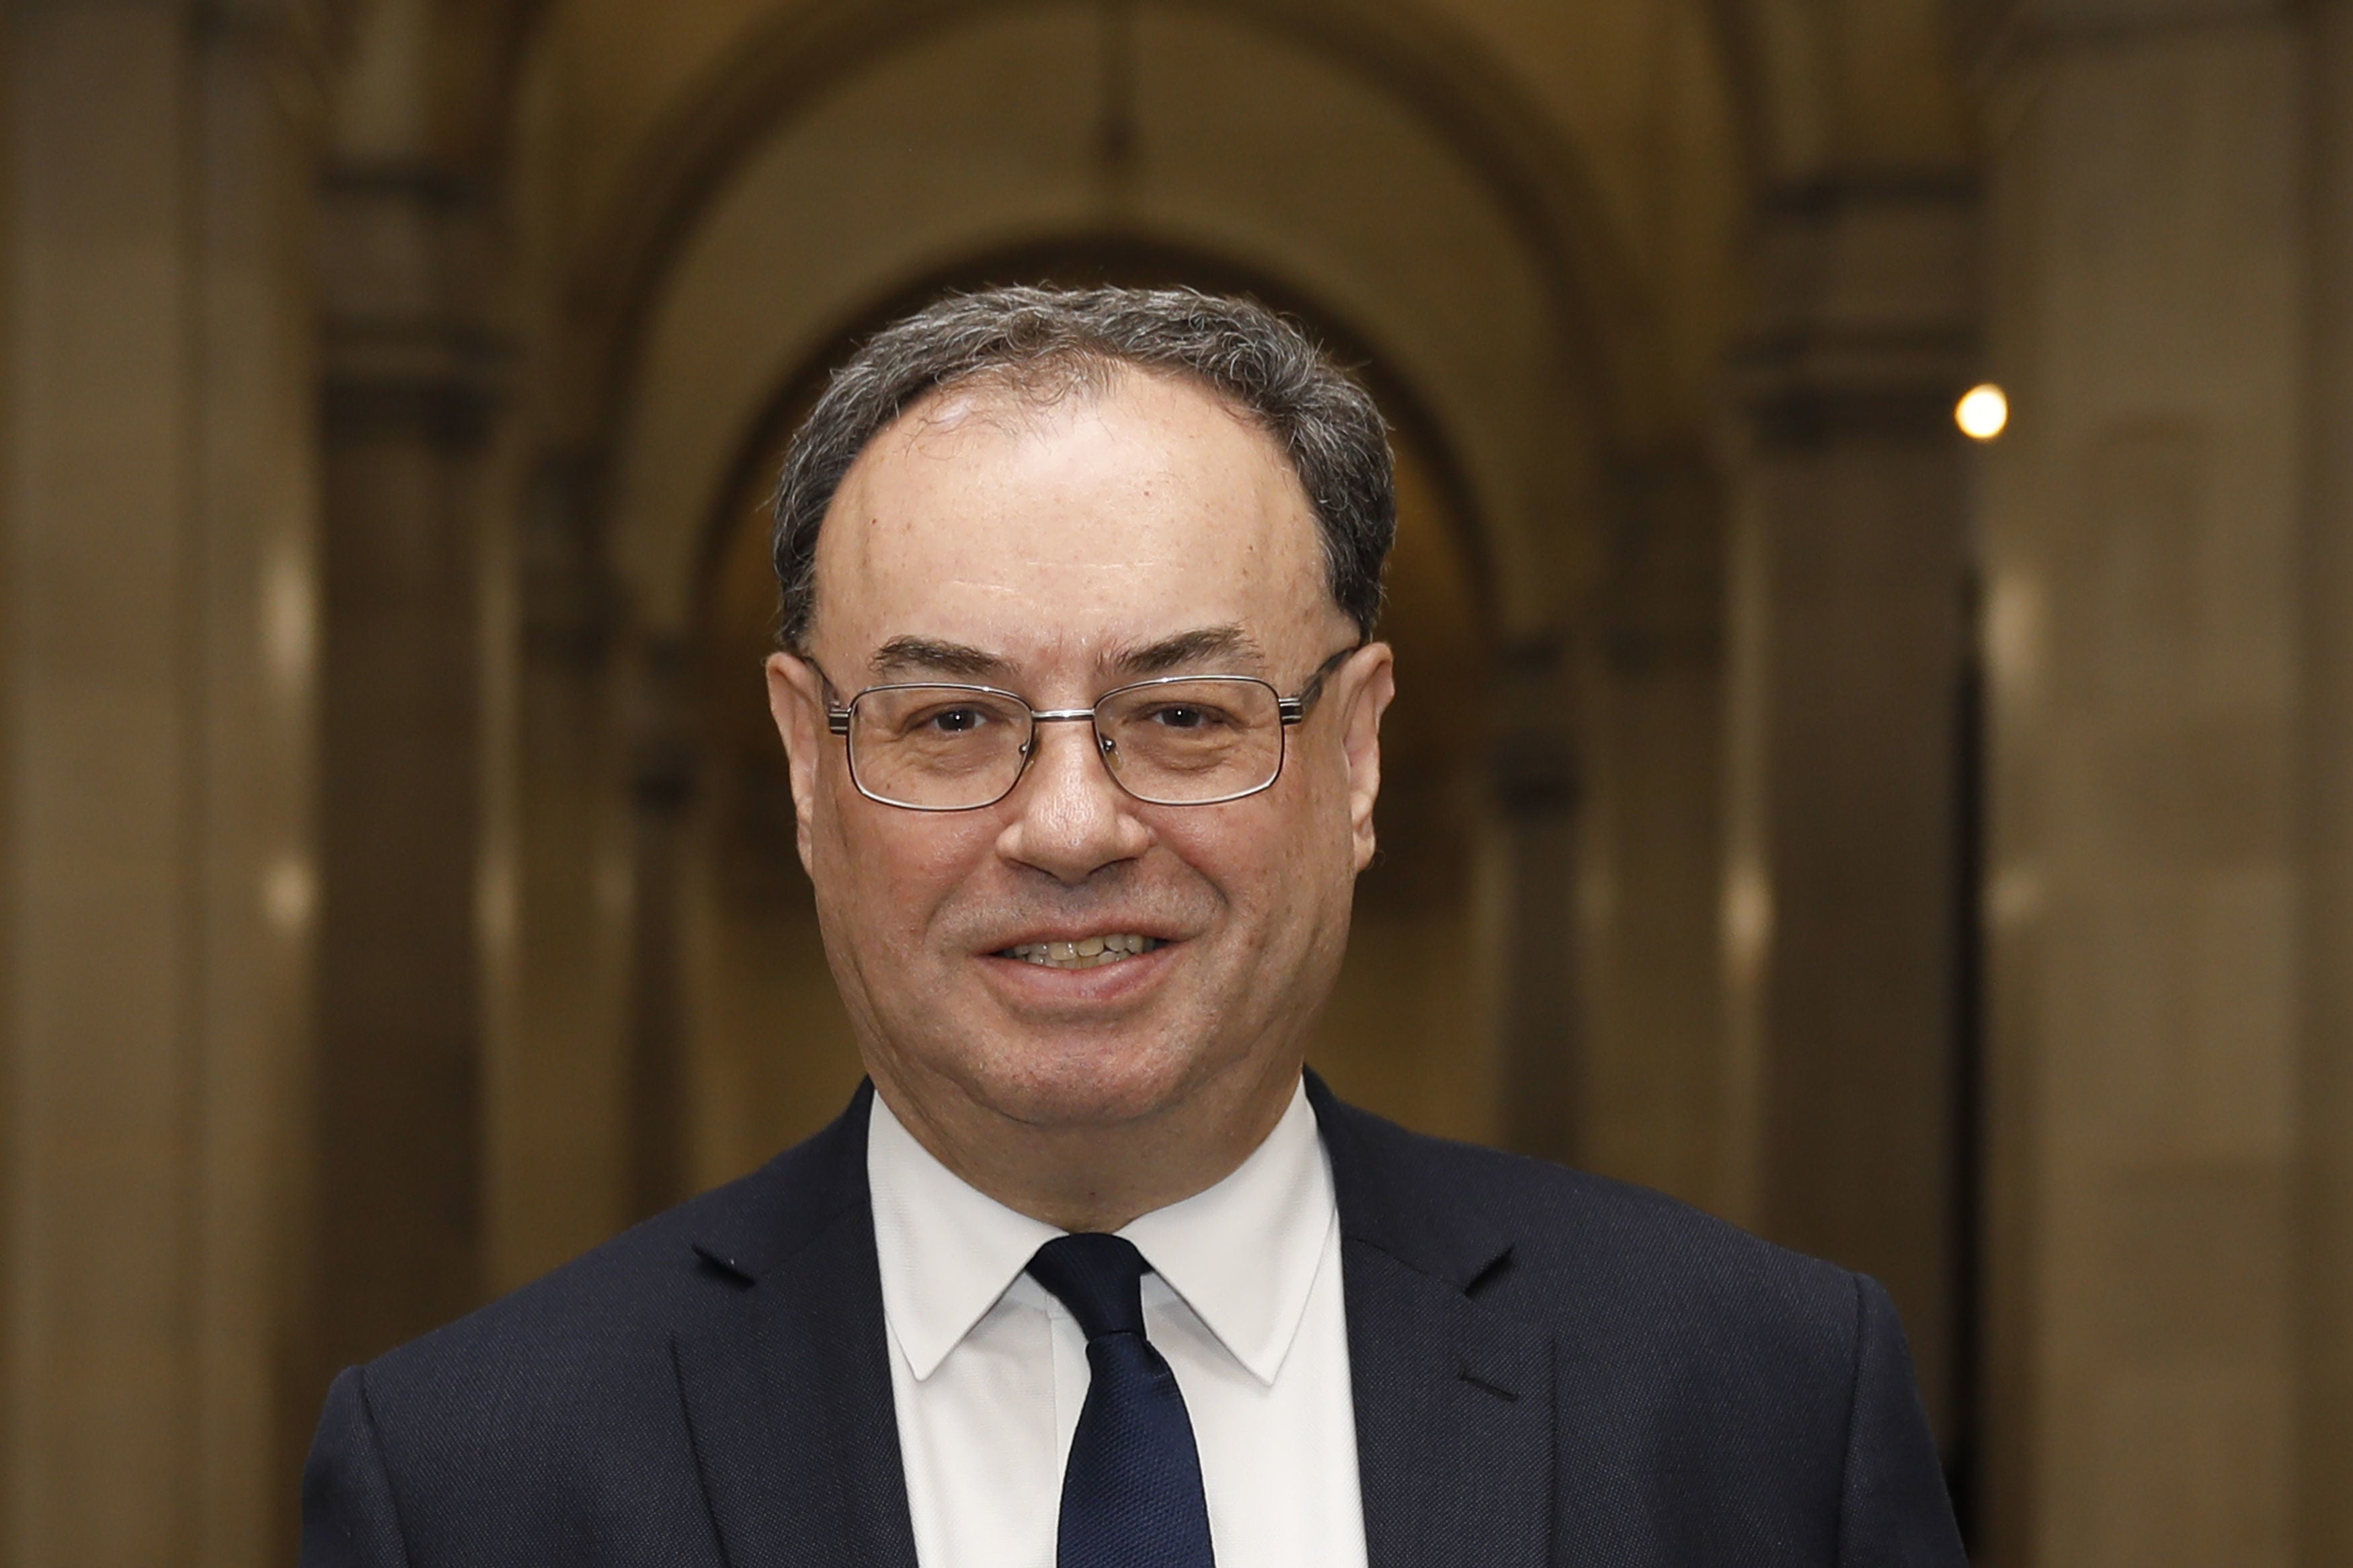 The Bank of England, headed by Andrew Bailey, is set to deliver its latest economic outlook on Thursday